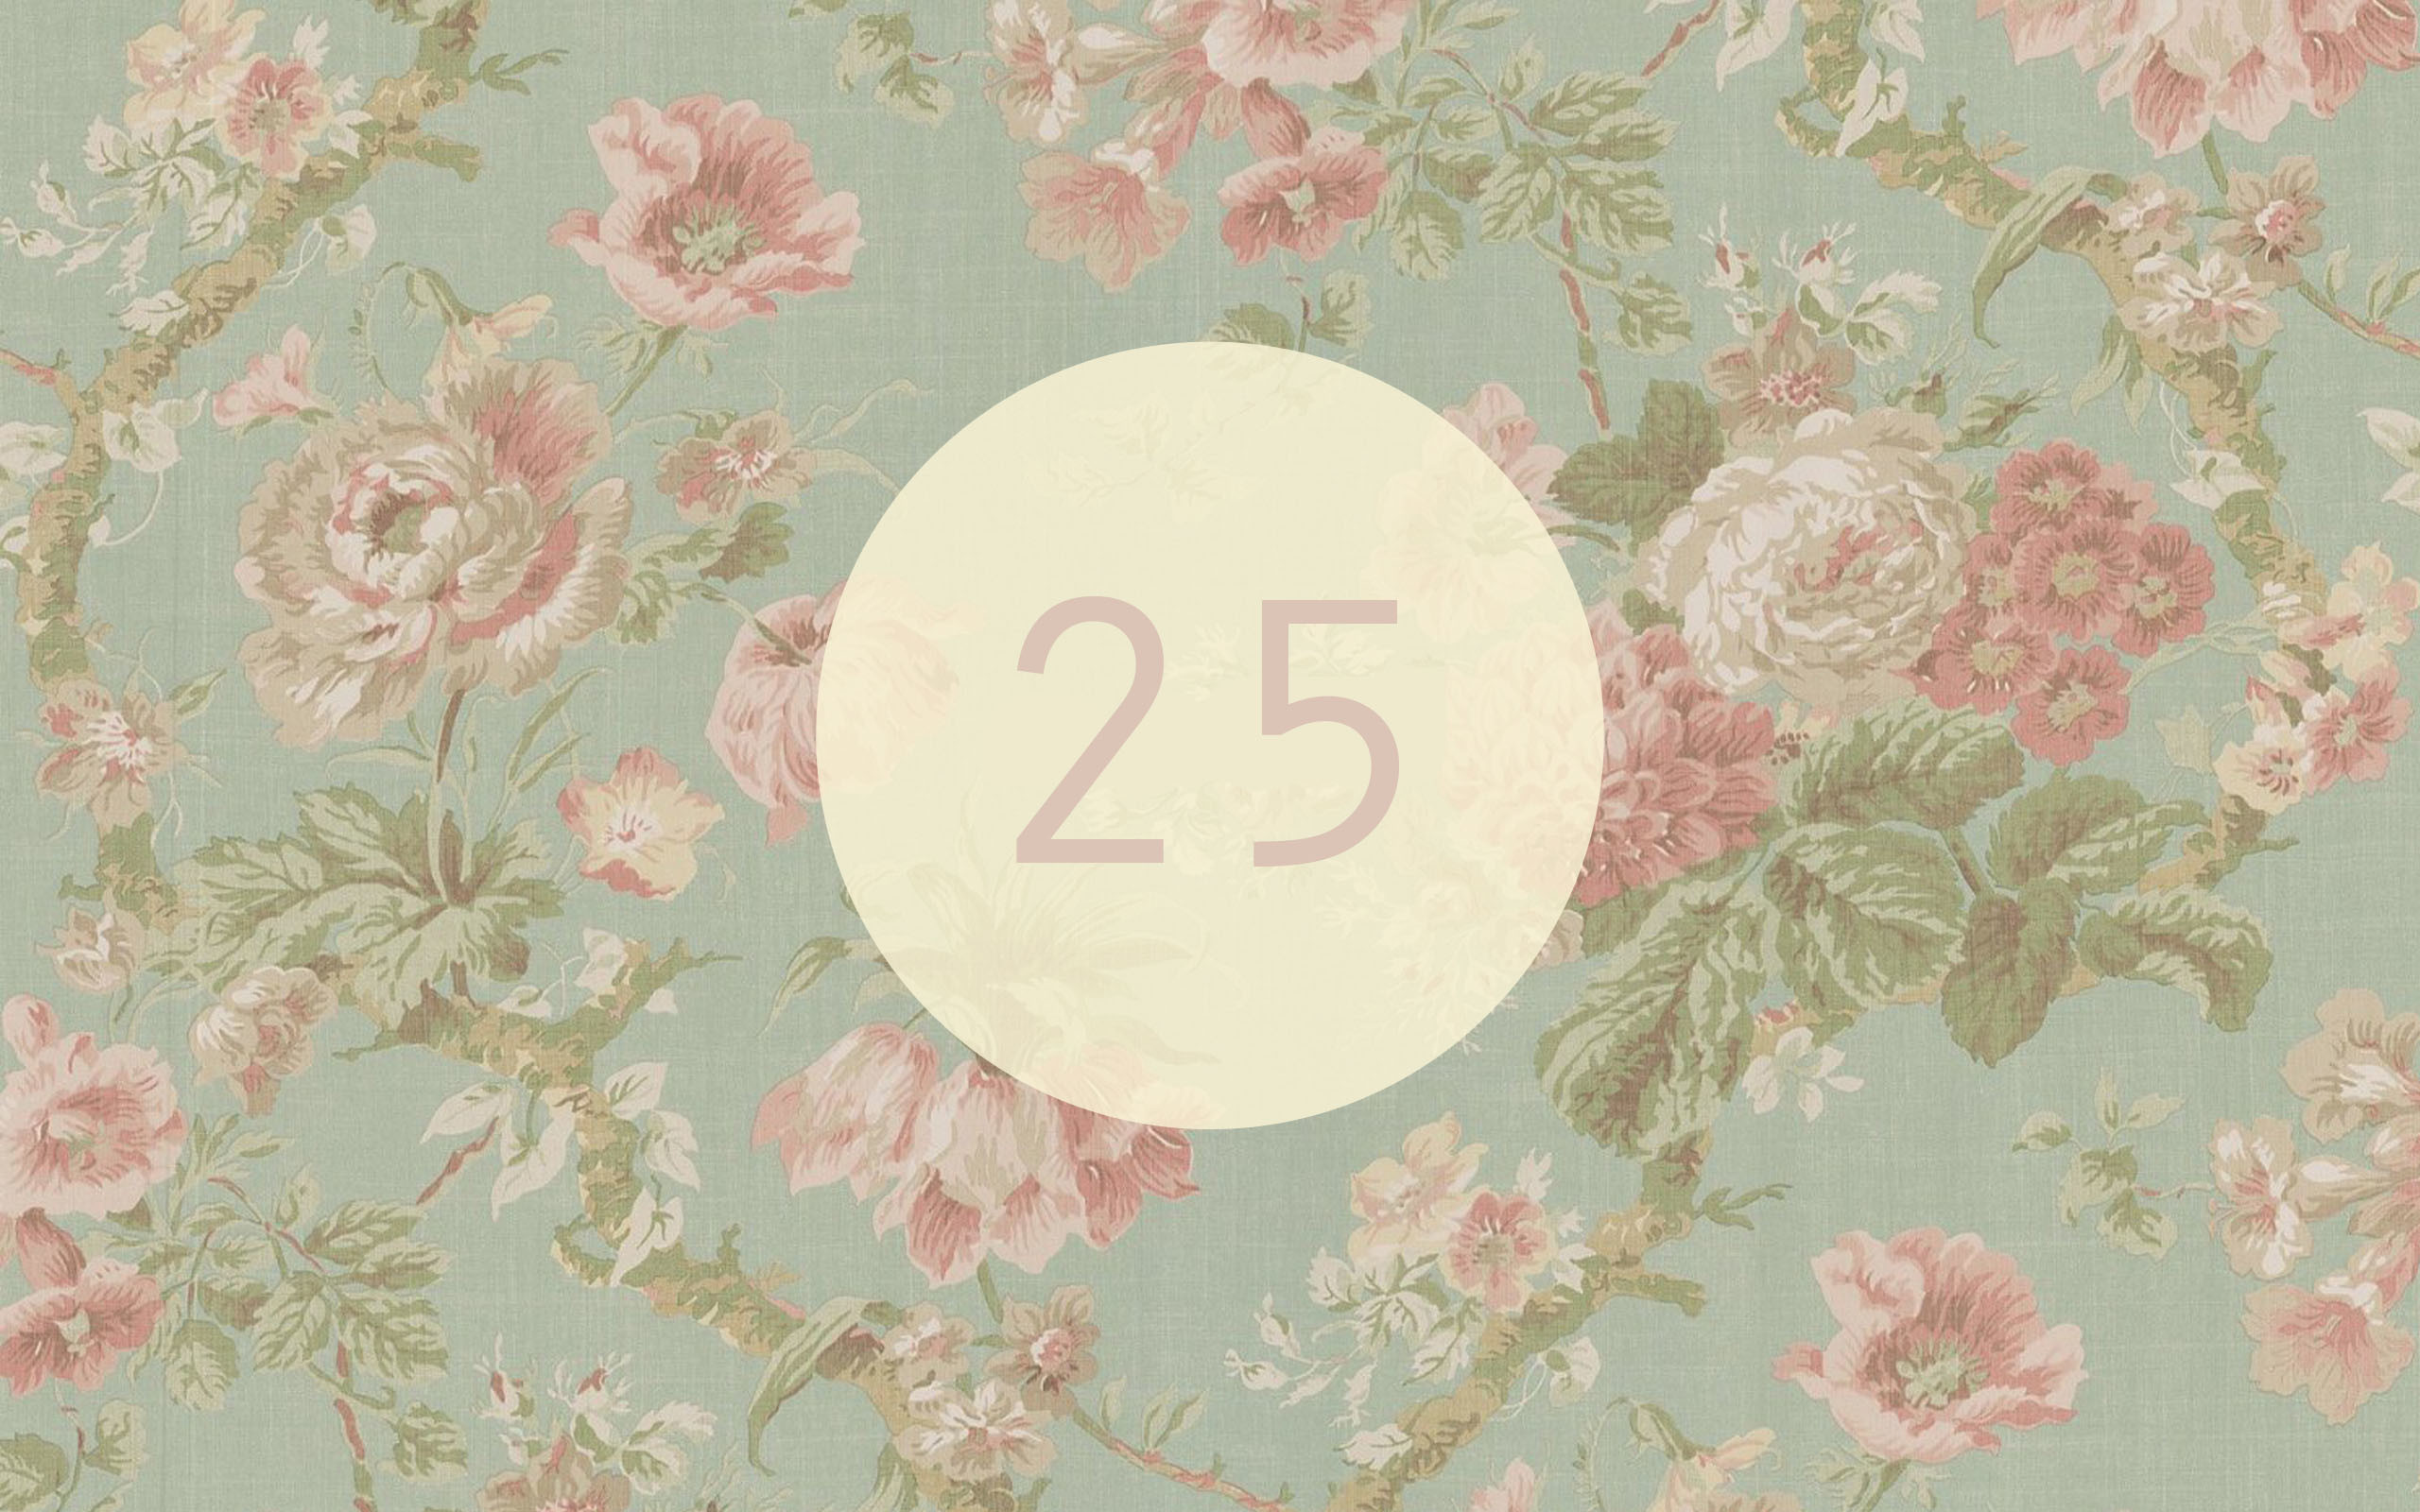 Today Is My 25th Birthday - Pastel Vintage Floral Background - HD Wallpaper 